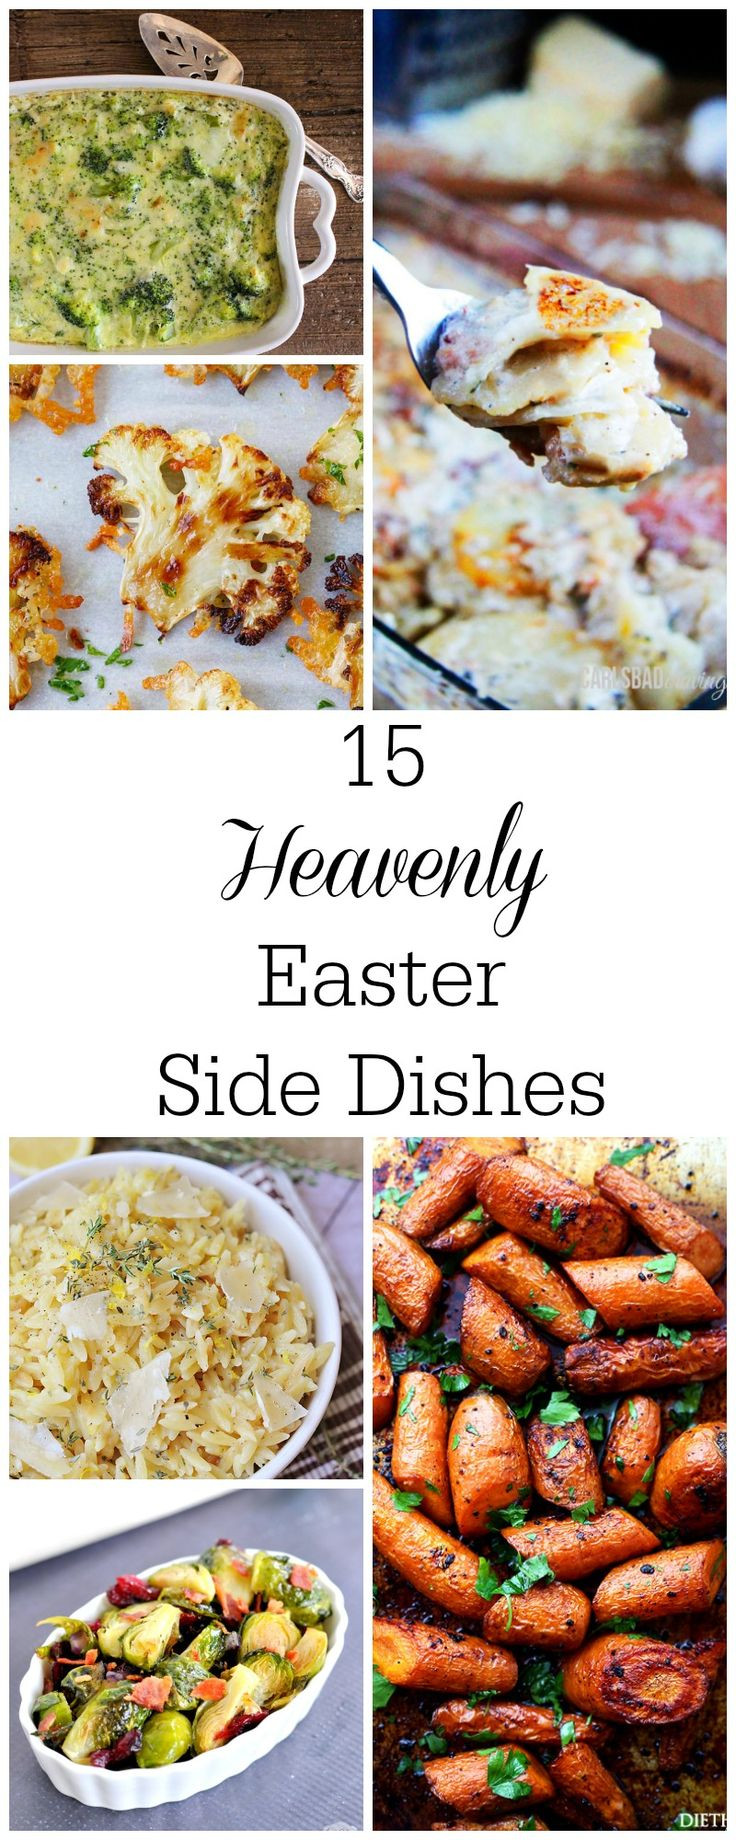 Easy Side Dishes For Easter
 Best 25 Easter side dishes ideas on Pinterest